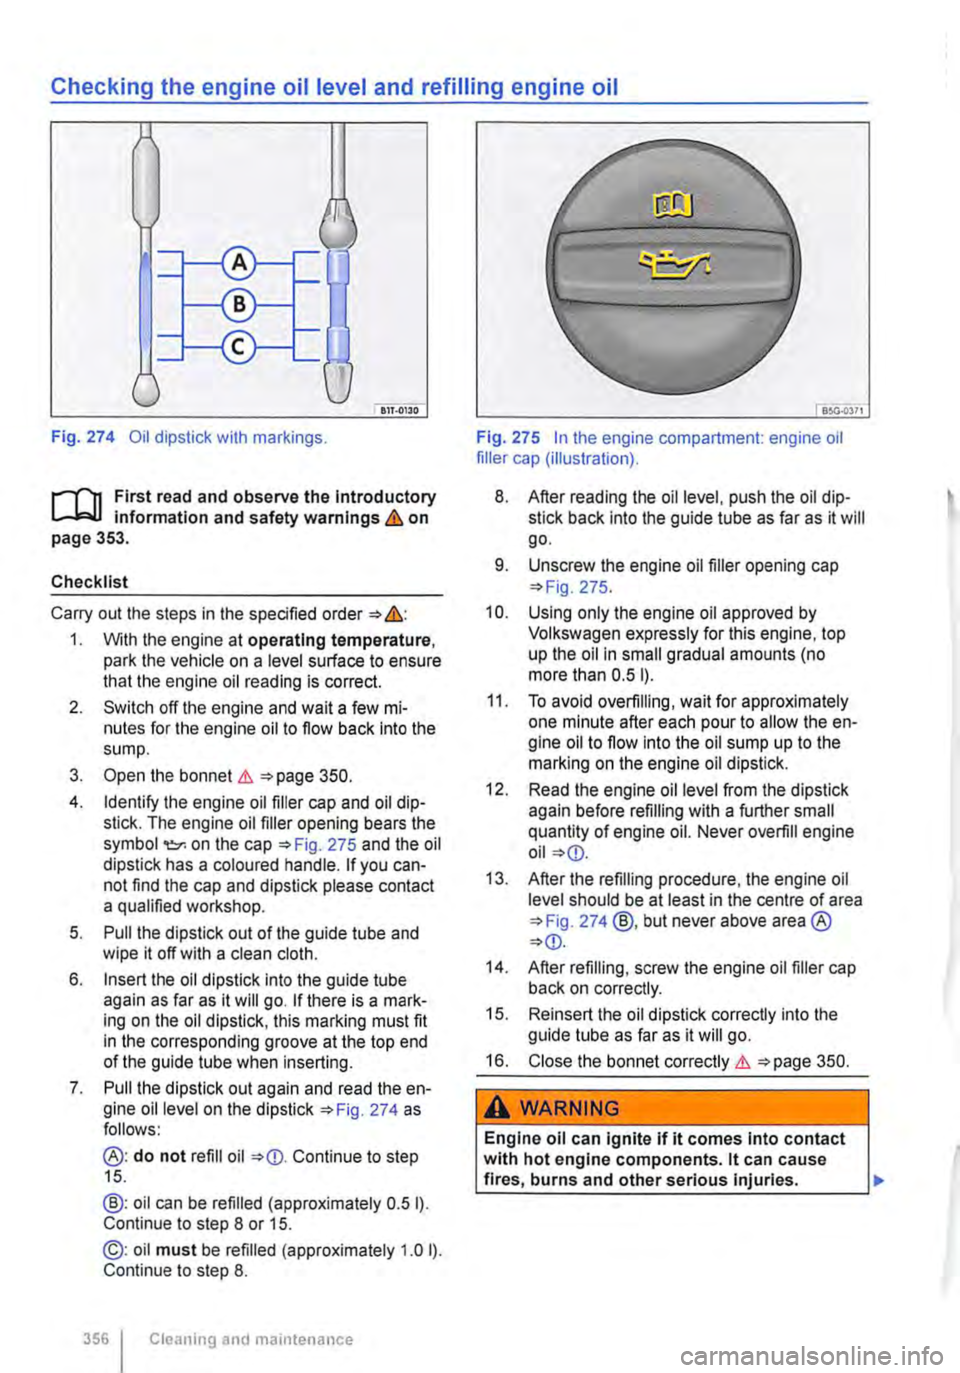 VOLKSWAGEN TRANSPORTER 2018  Owners Manual Checking the engine oil level and refilling engine oil 
Fig. 274 Oil dipstick with markings. 
r-111 First read and observe the Introductory L-W! information and safety warnings & on page 353. 
Checkli